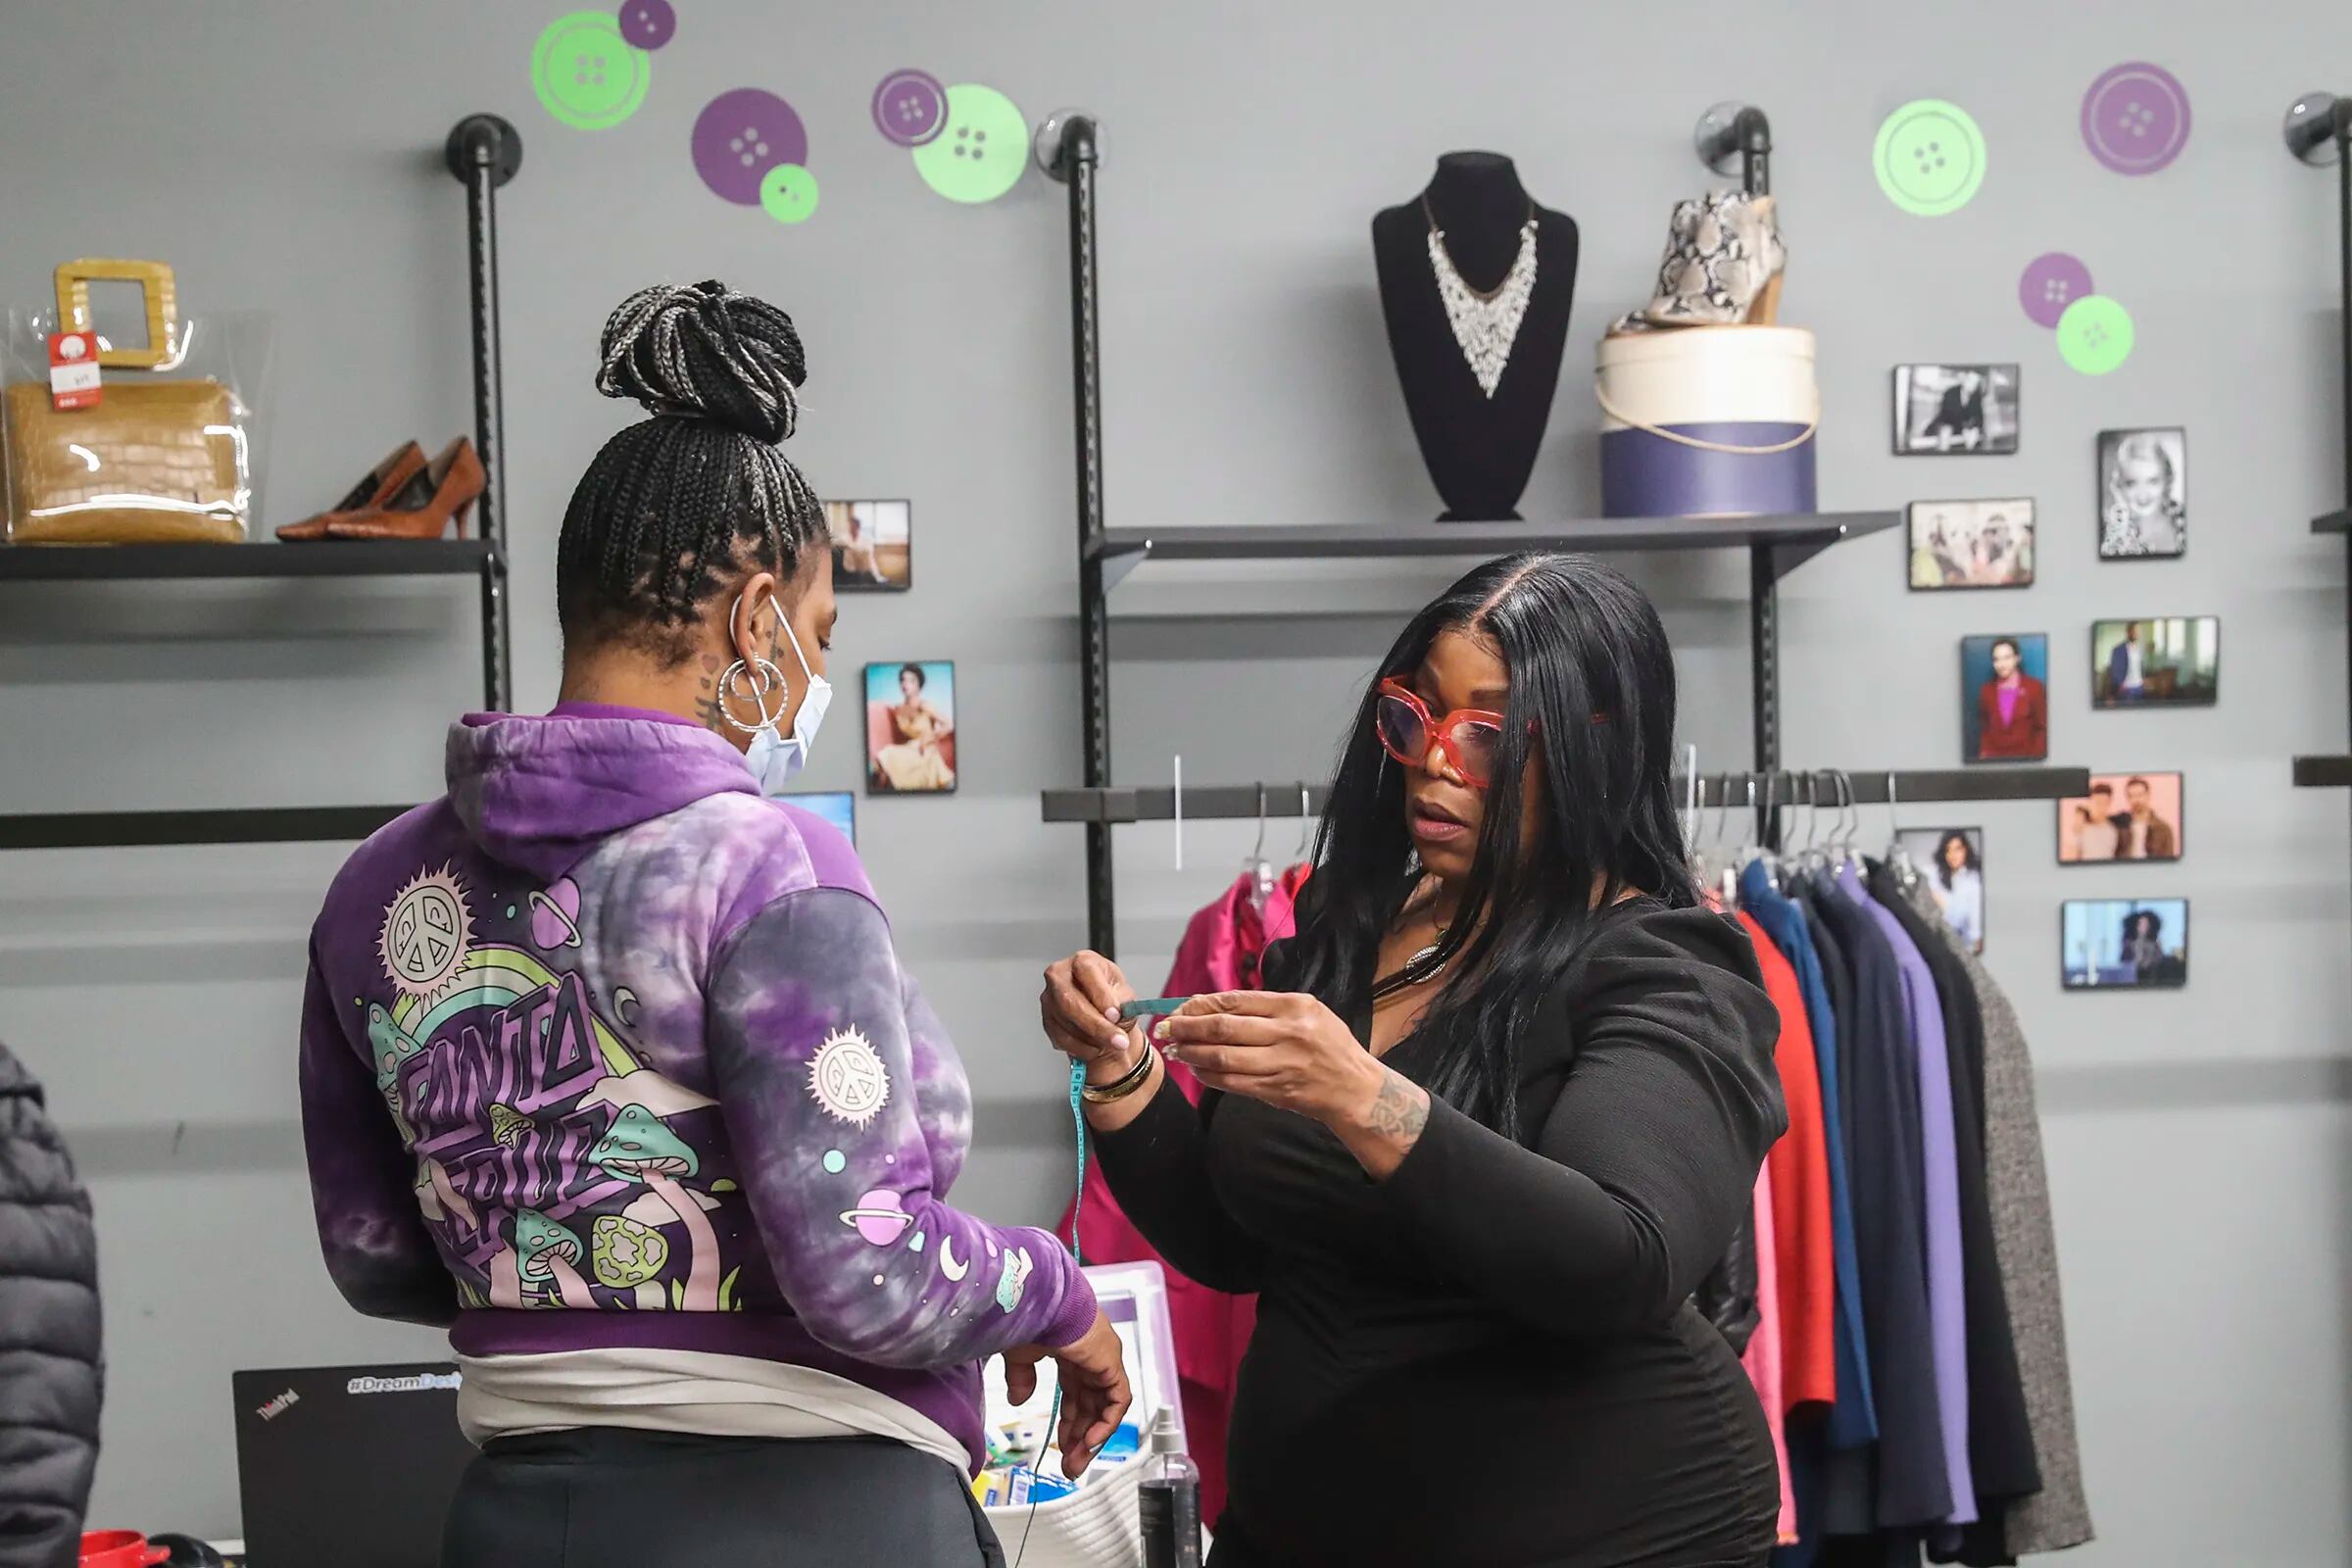 The Wardrobe in Philly: Clothes for those in need - WHYY